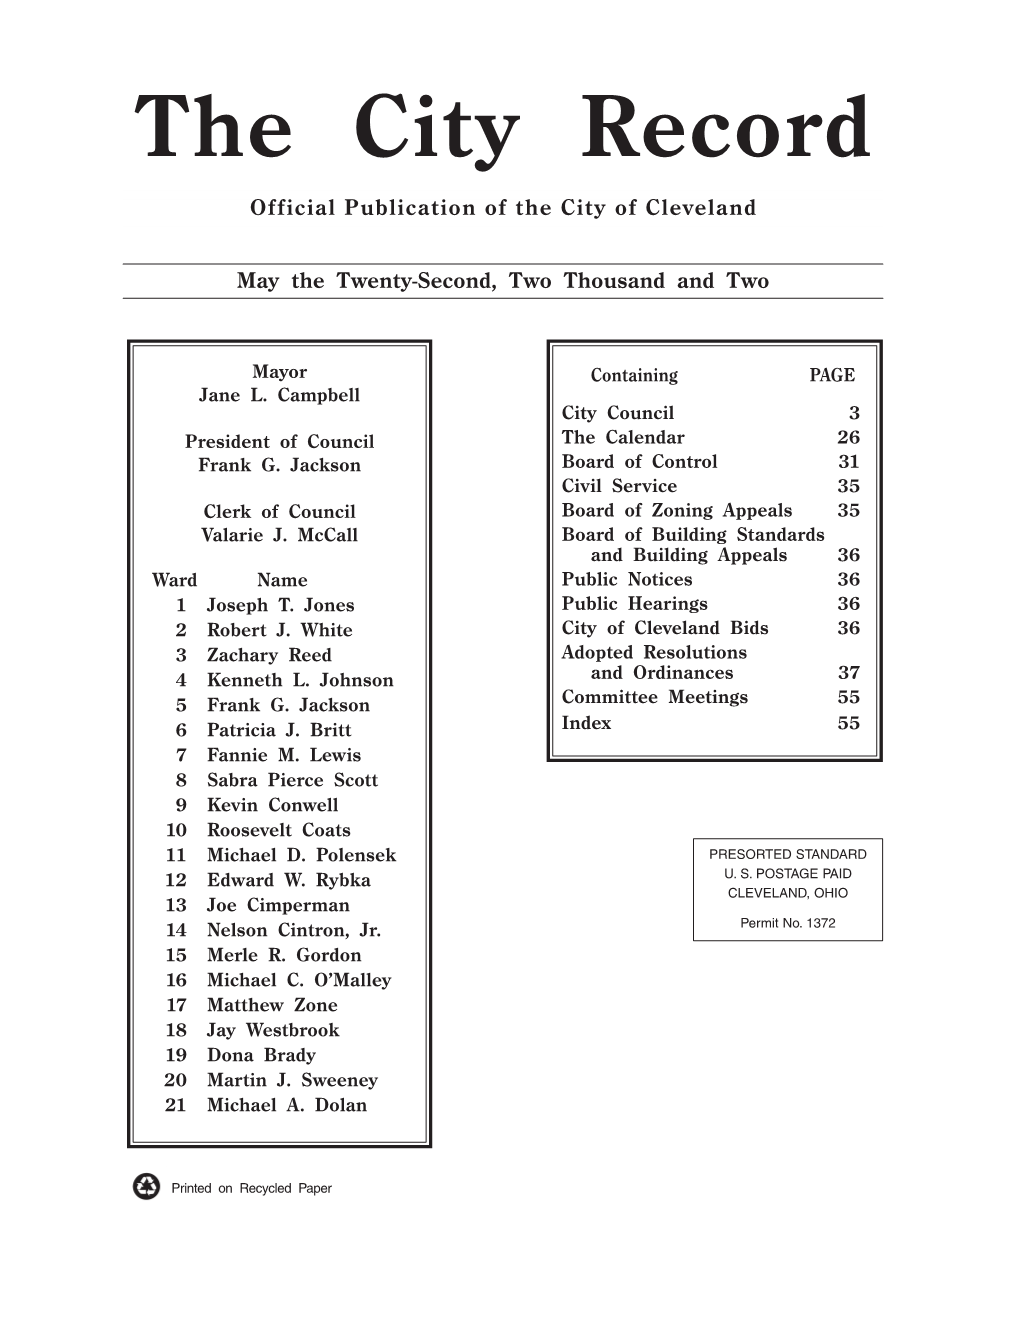 City Record 05-22-02-Issue